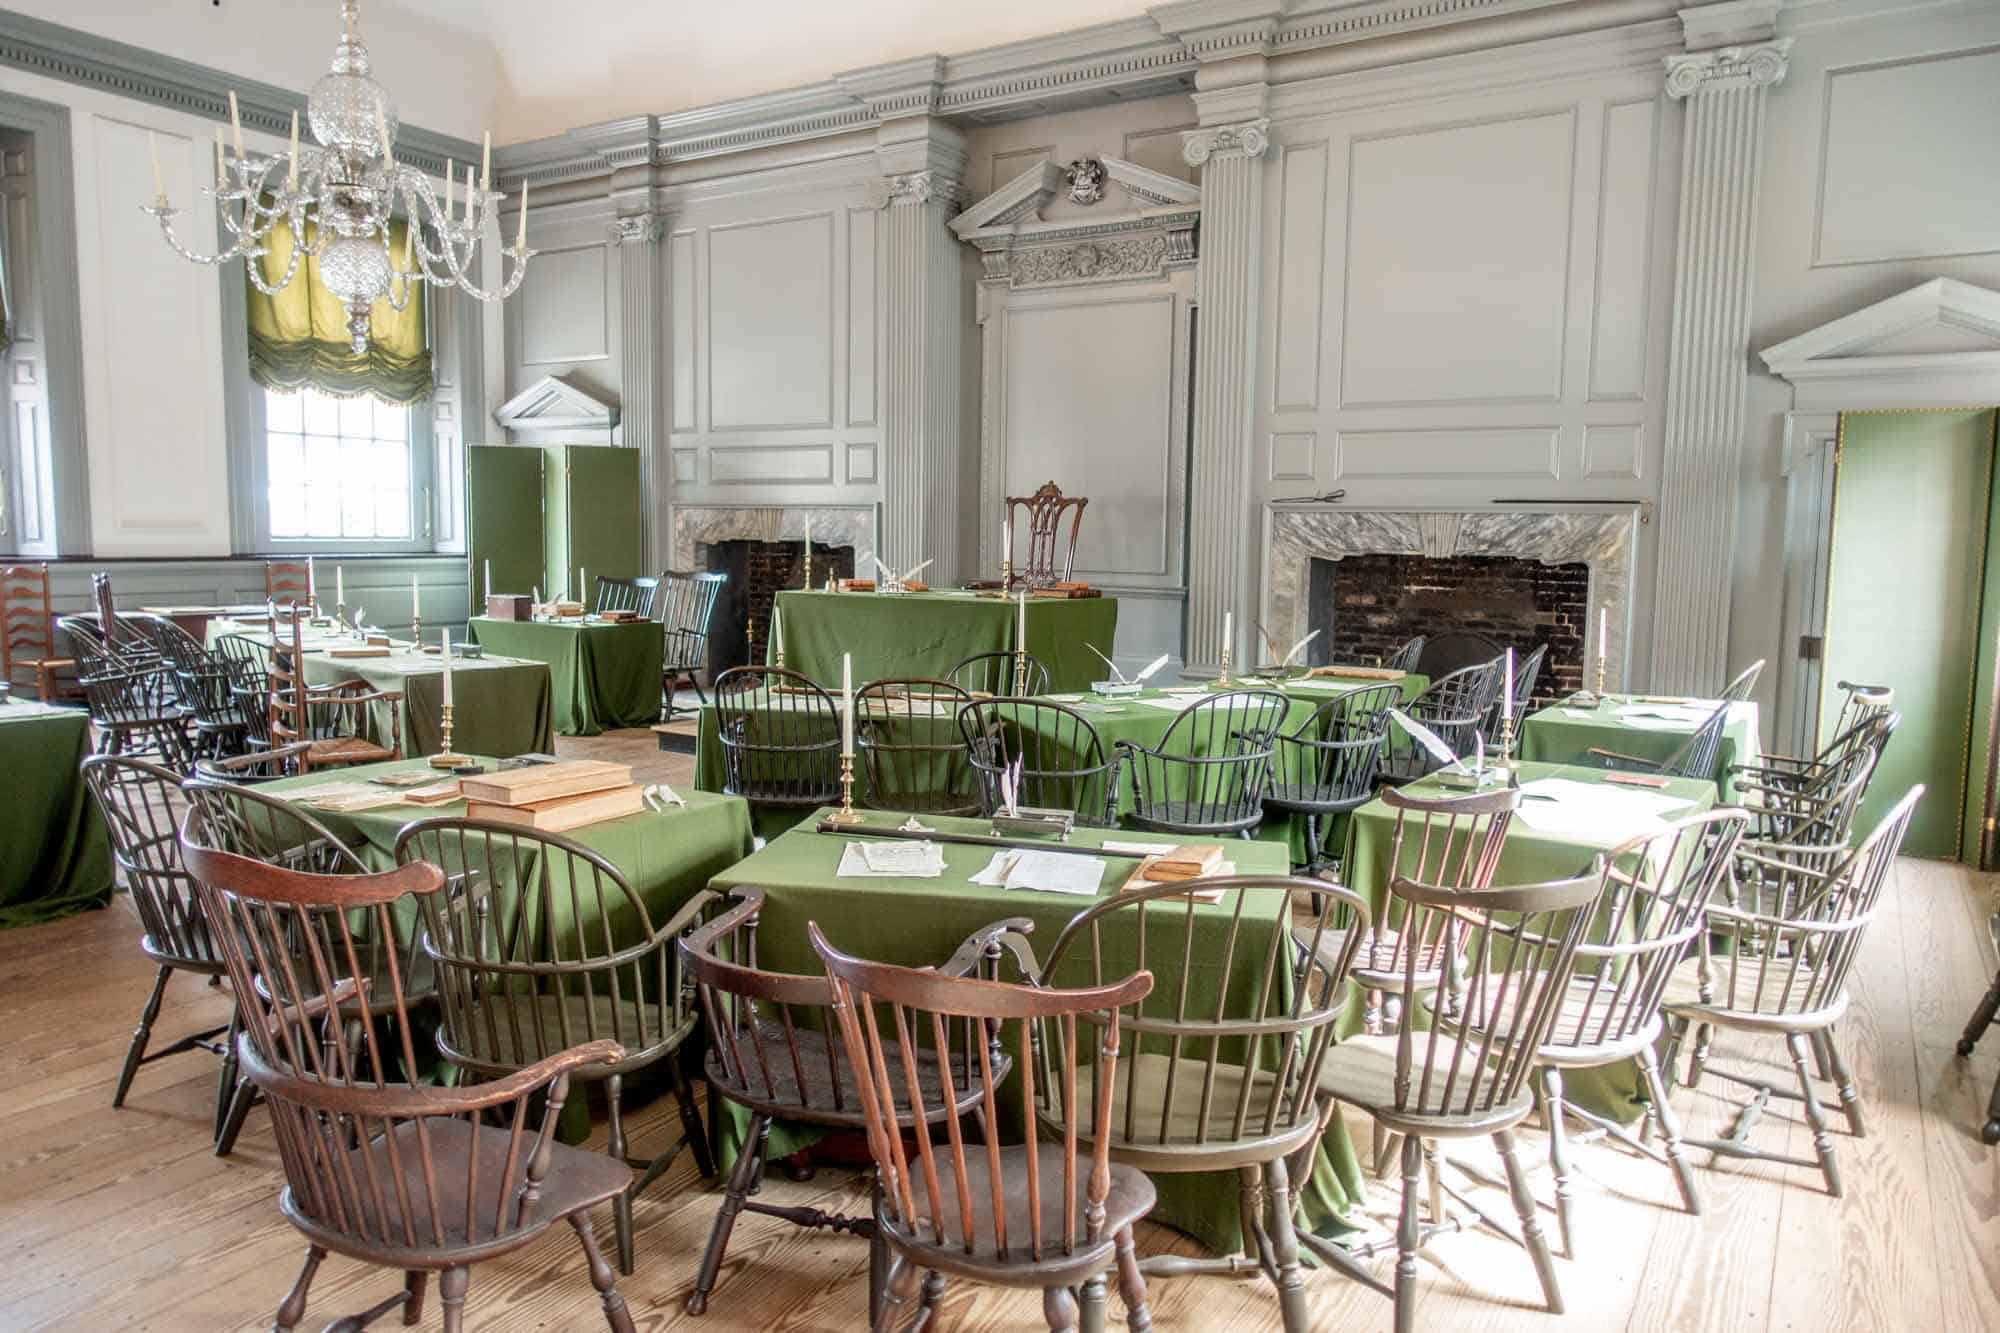 Room with chairs and tables covered in green tablecloths